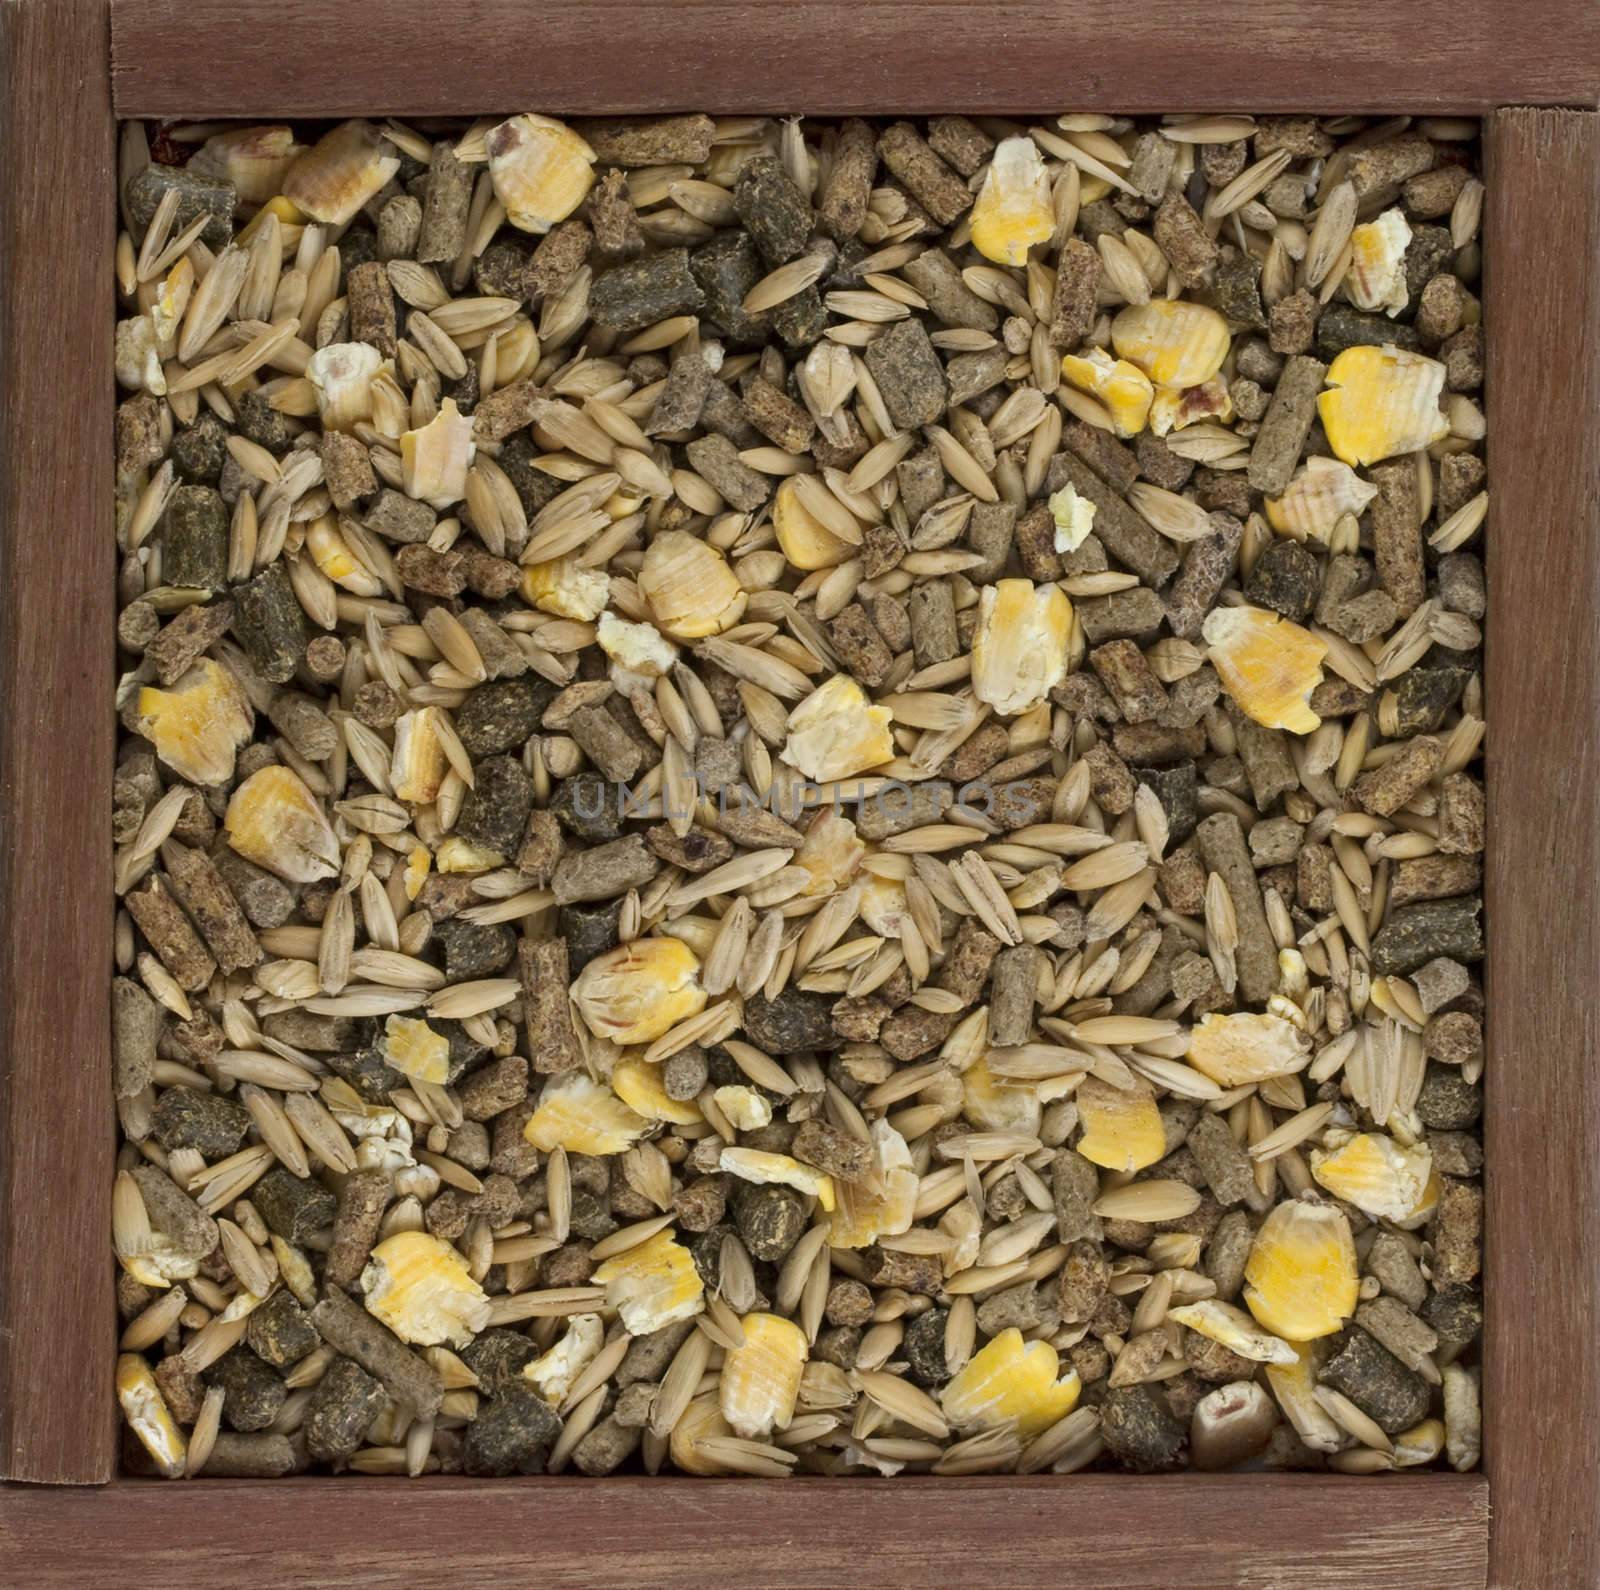 horse feed with corn, barley, oats grain and suplement granulates in  a rustic wooden box